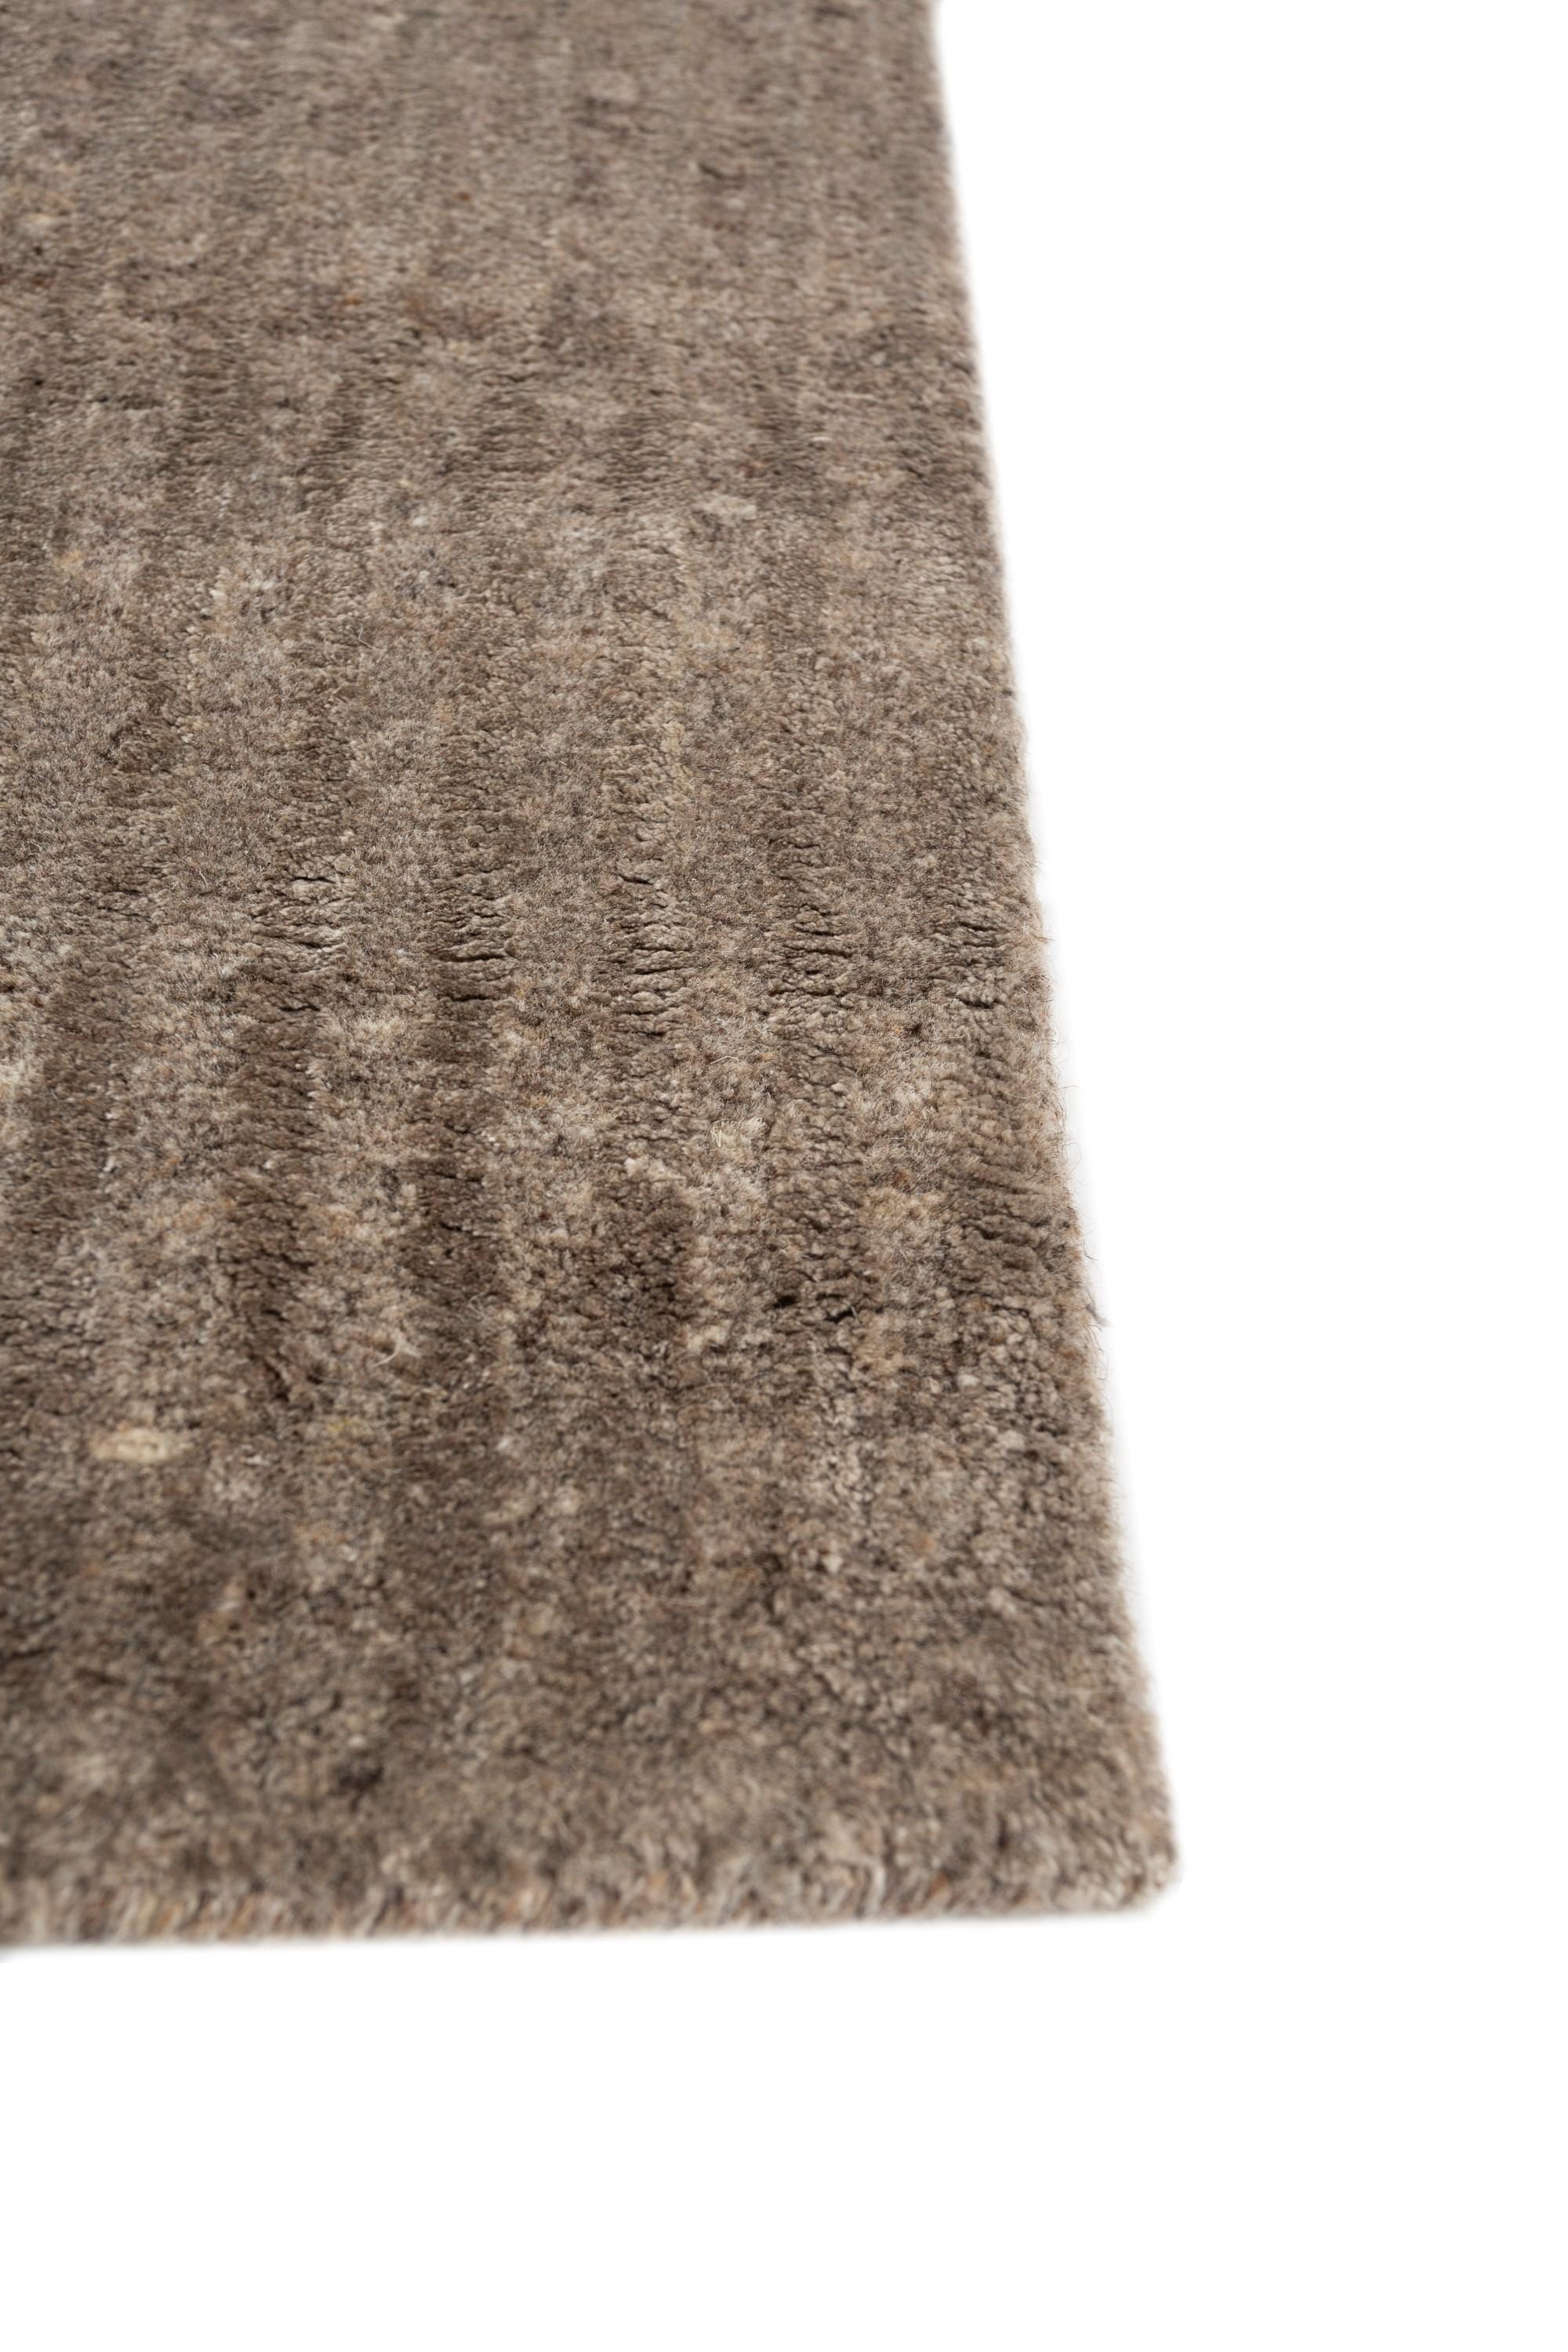 Mid-Century Modern Earthy Enigma Natural Soot & Natural Taupe 180x270 cm Hand Knotted Rug For Sale